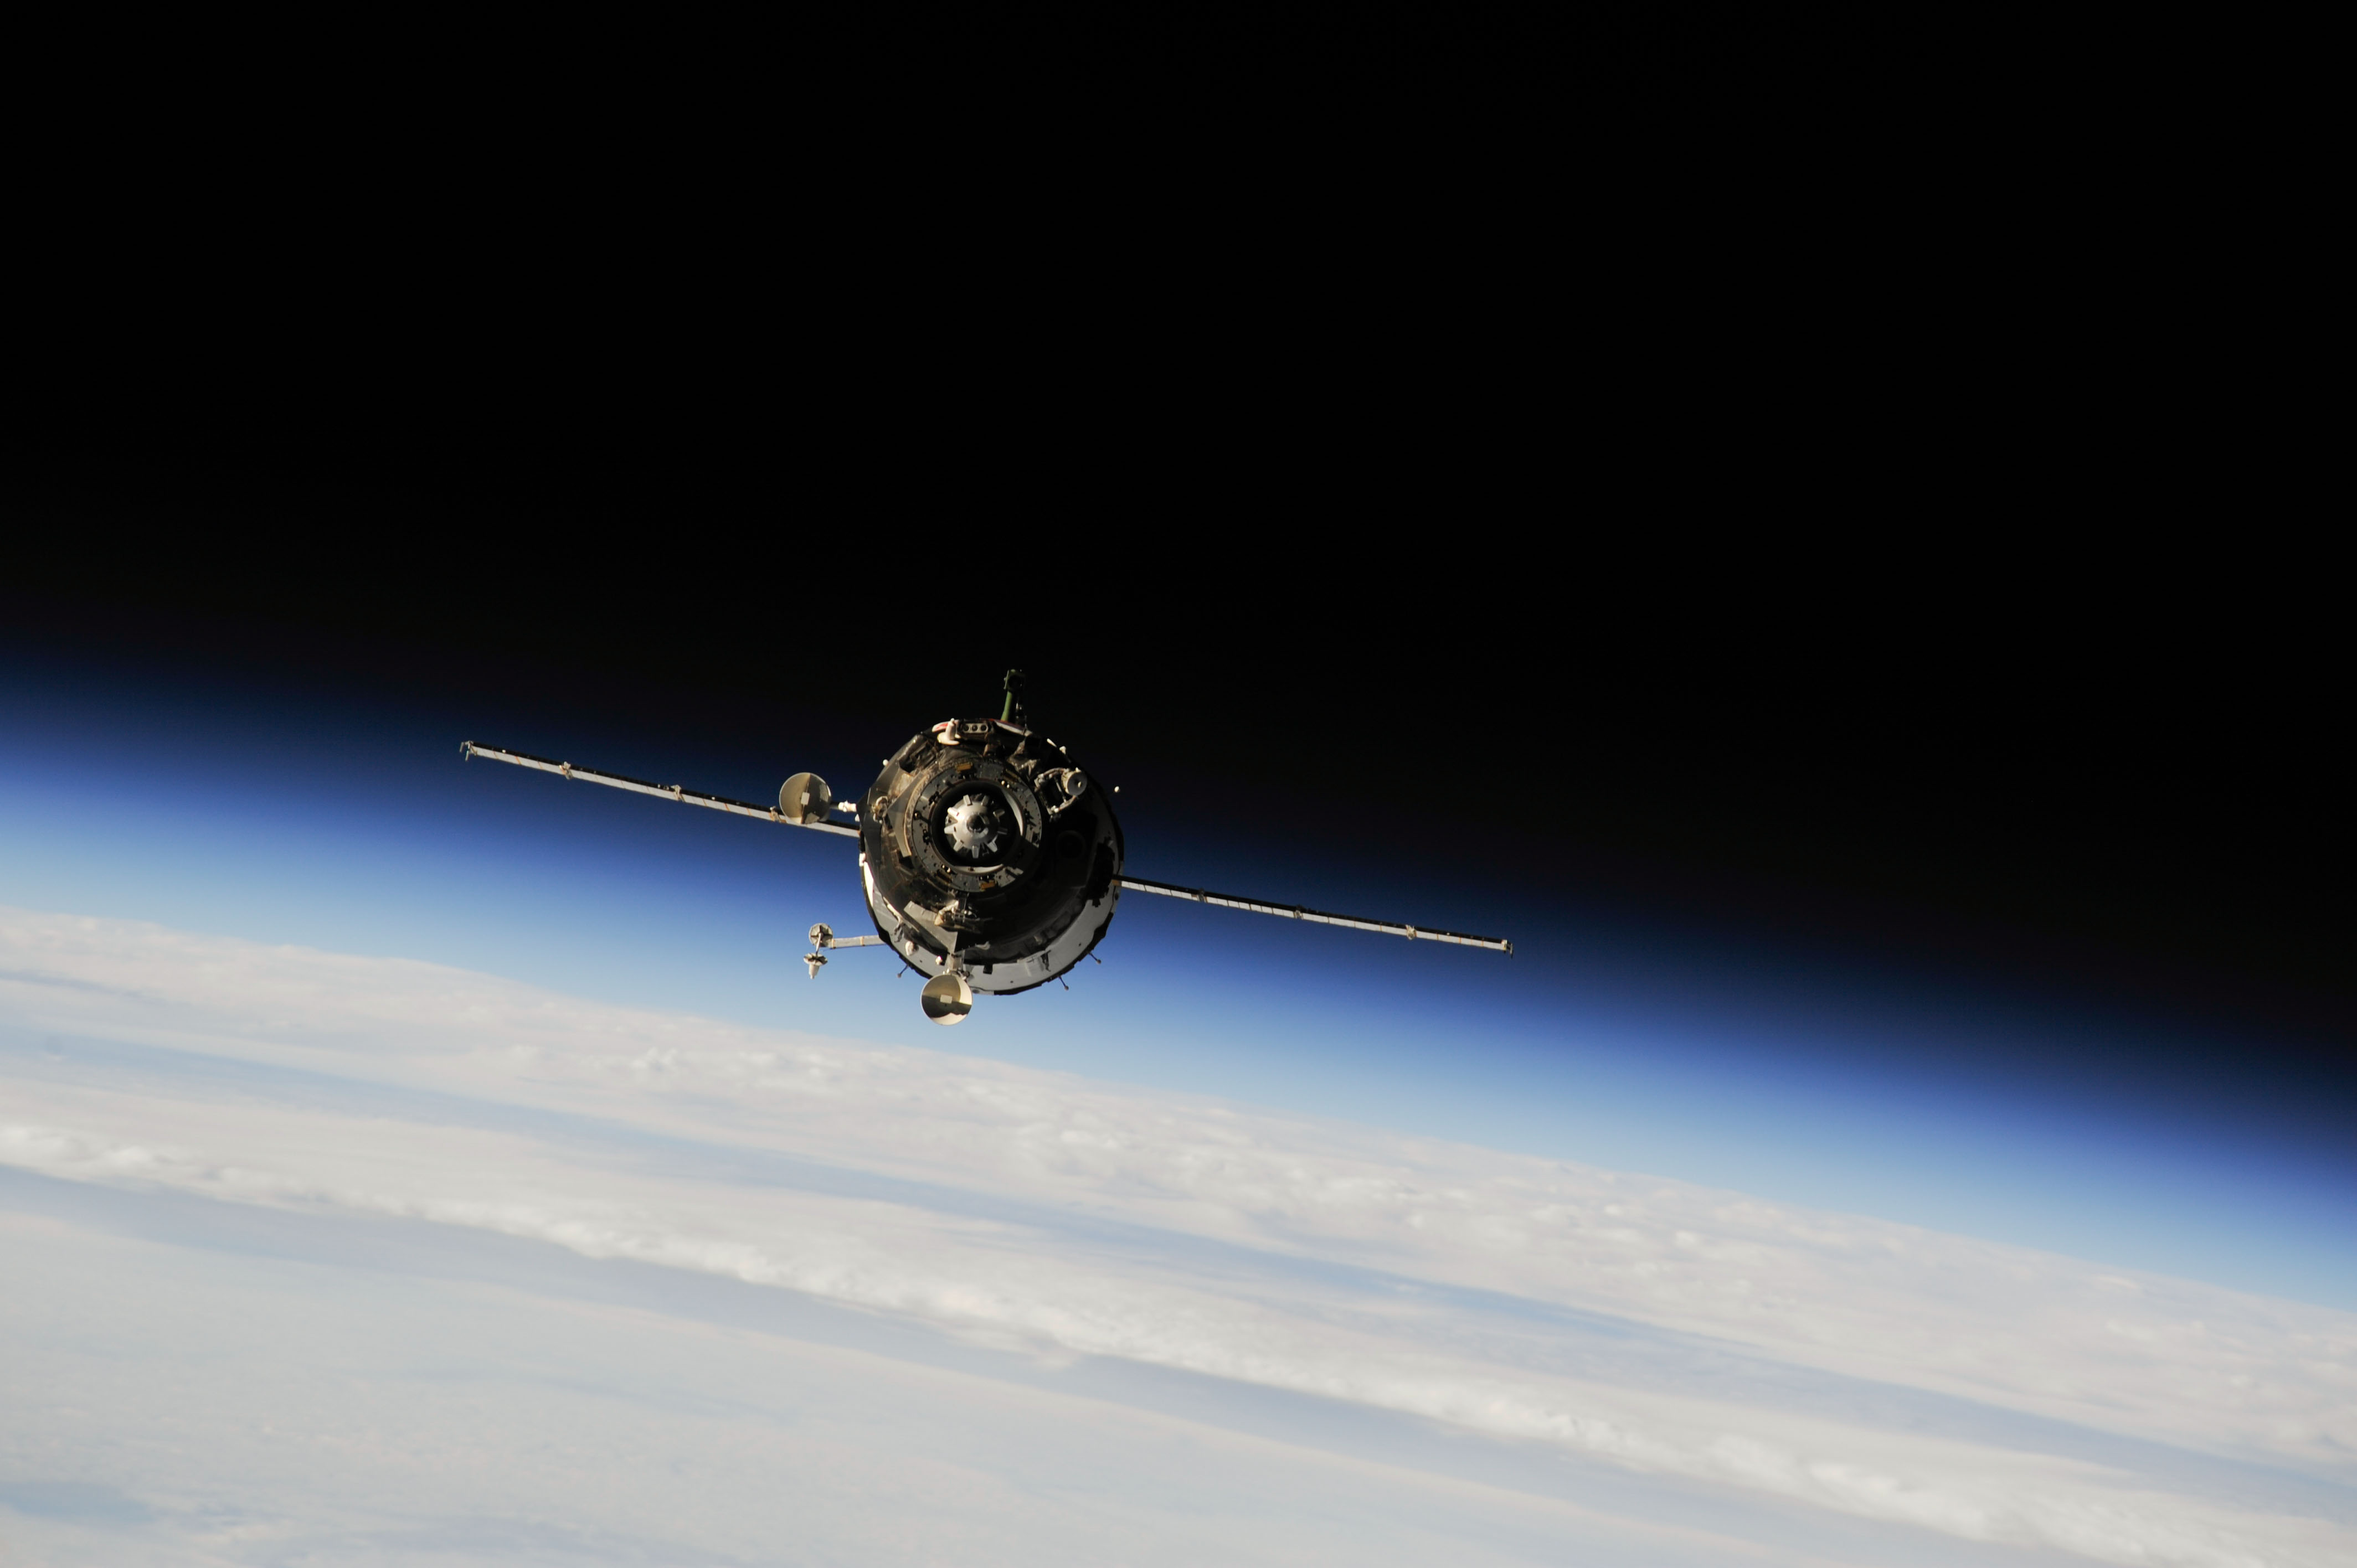 Next week, Soyuz TMA-11M will arrive at the International Space Station, carrying three new crew members. Before their arrival, however, the Soyuz TMA-09M spacecraft will vacate the Rassvet module tomorrow and redock at the Zvezda aft port. Photo Credit: NASA